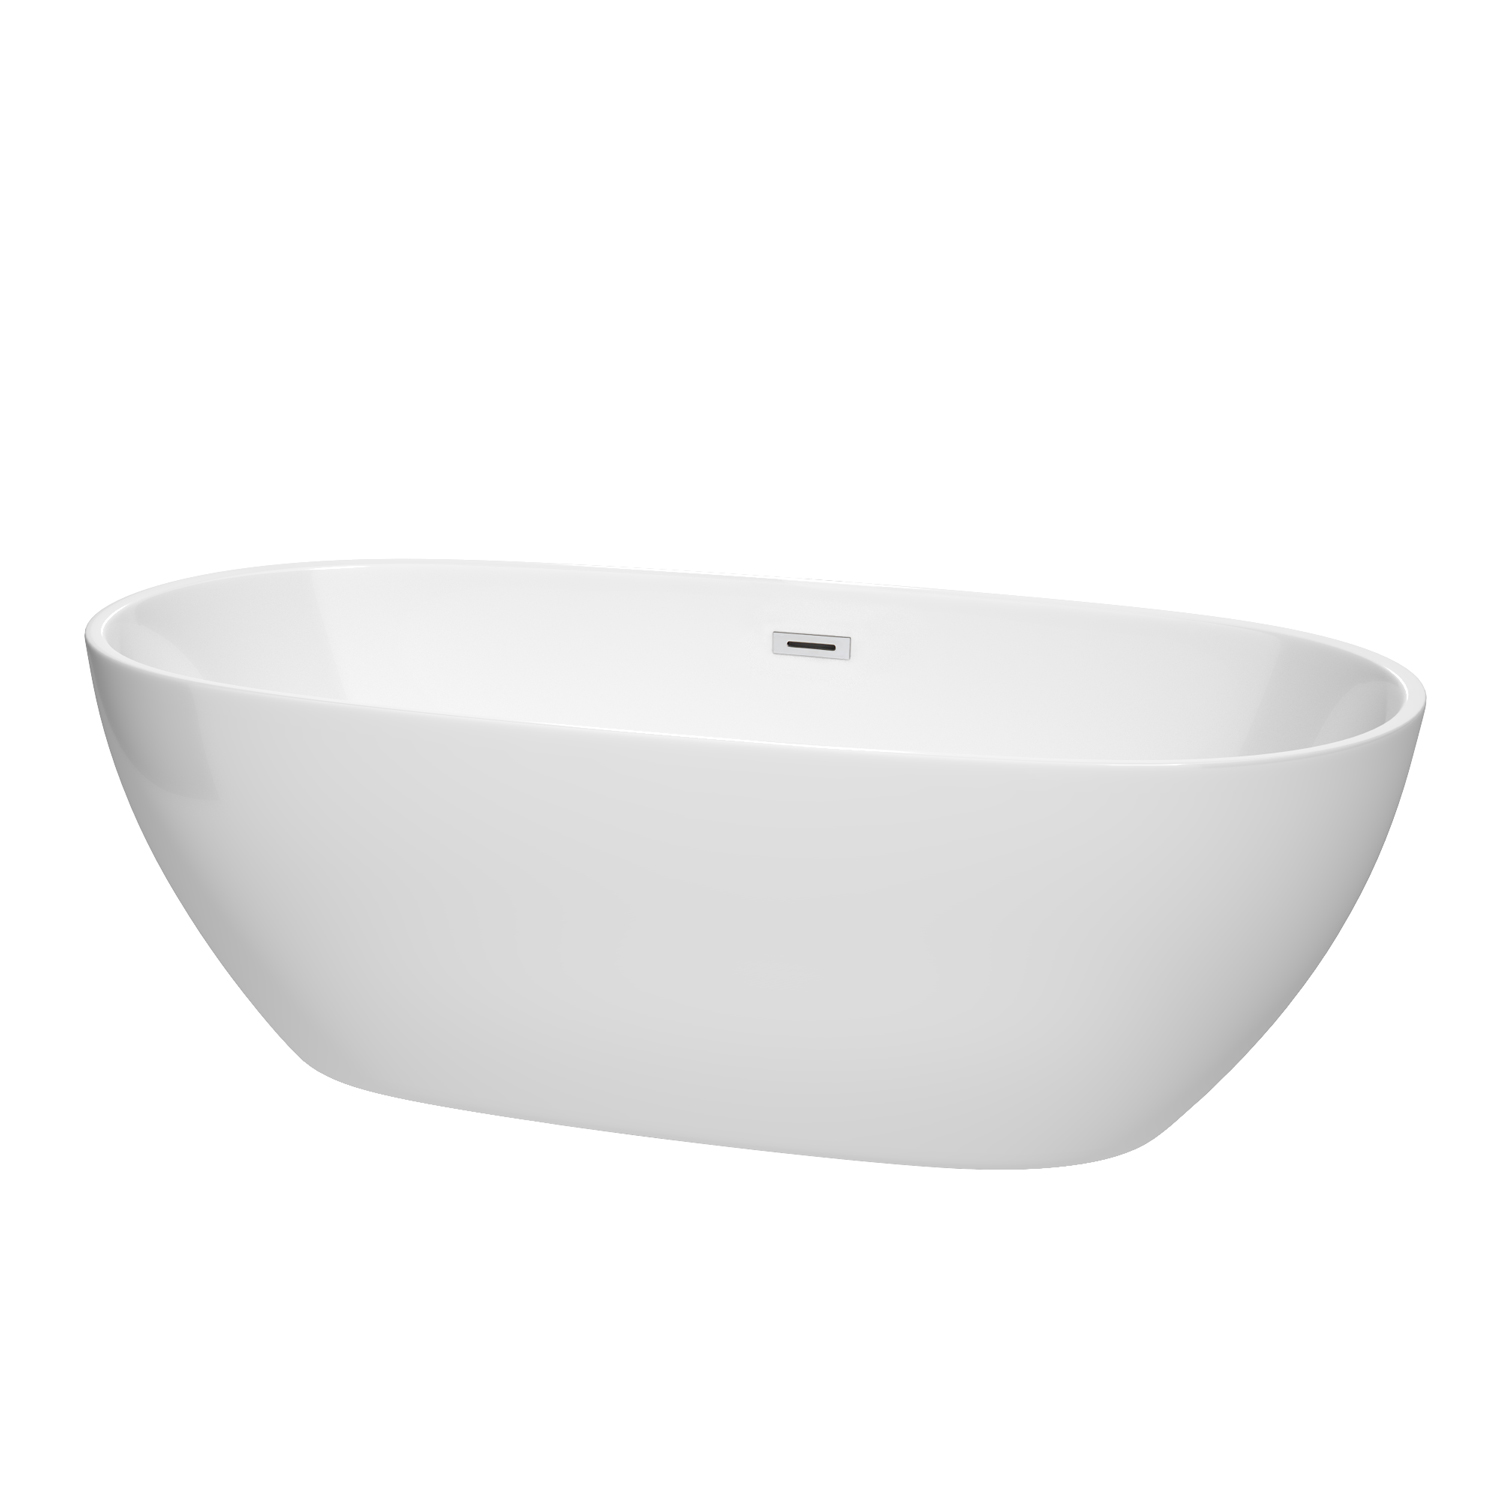 71" Freestanding Bathtub in White with Polished Chrome Drain and Overflow Trim with Hardware and Faucet Option